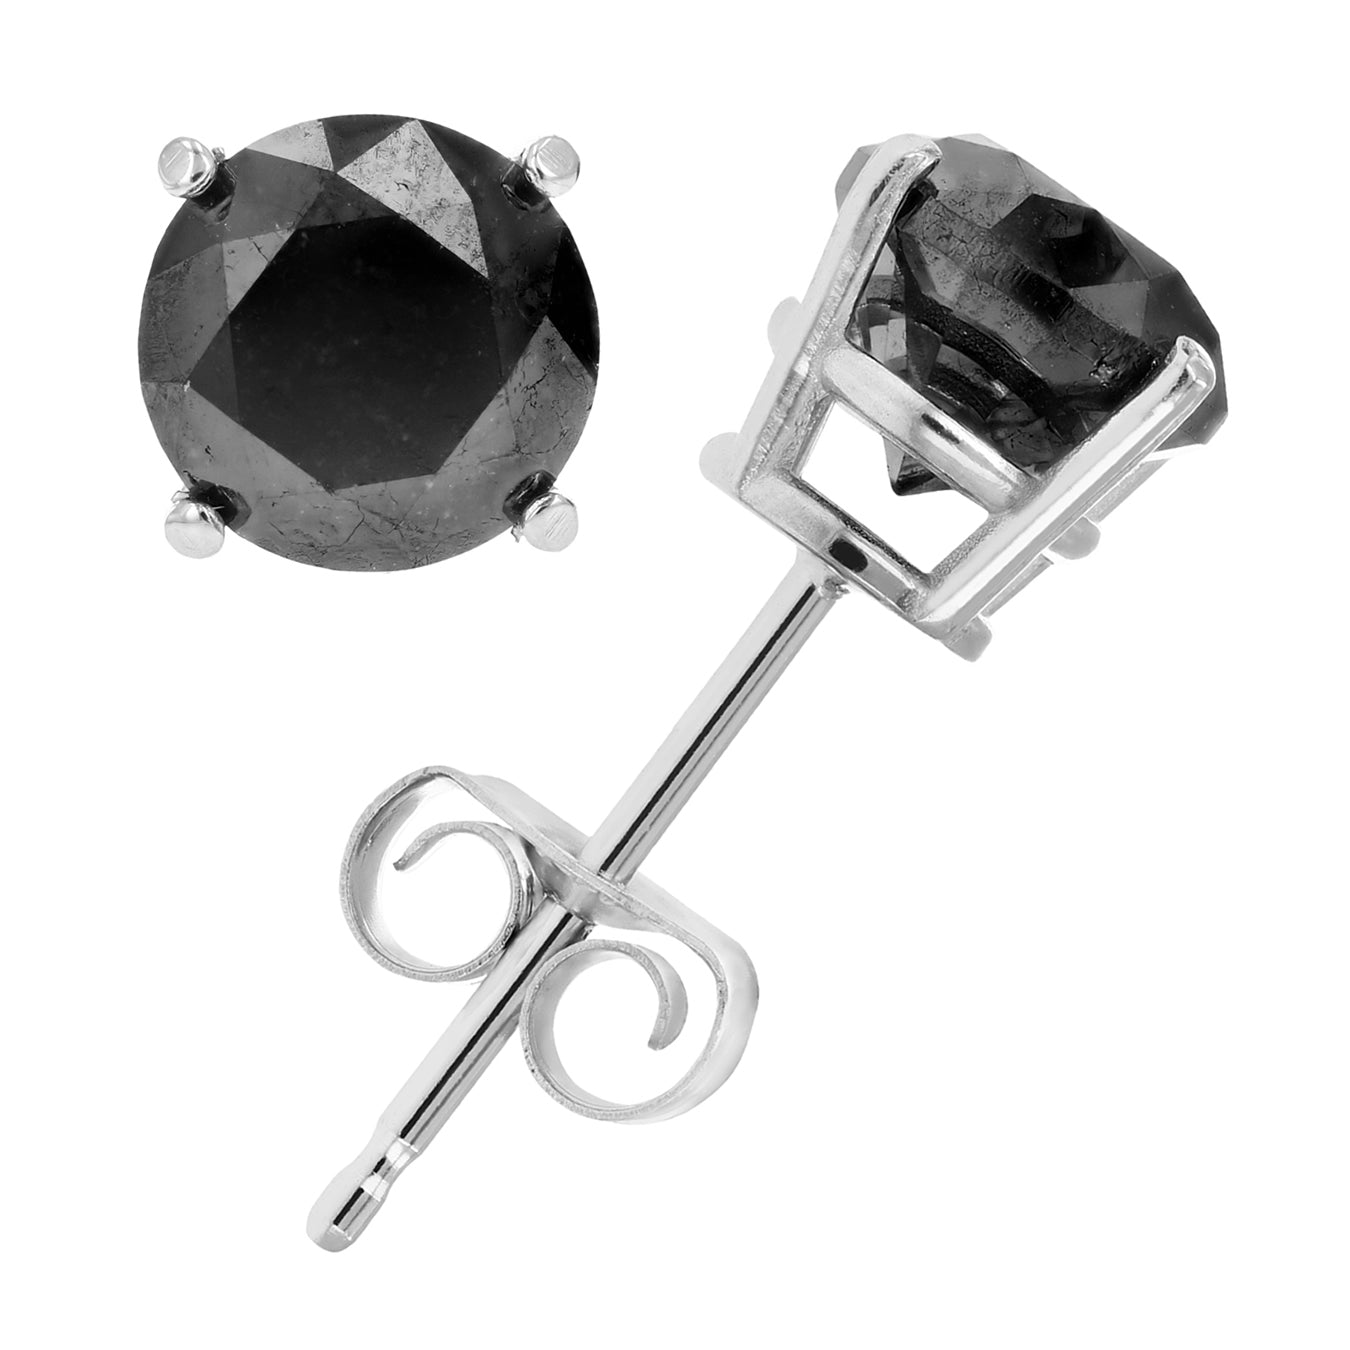 2.50 cttw Black Diamond Stud Earrings .925 Sterling Silver Round with Push Backs